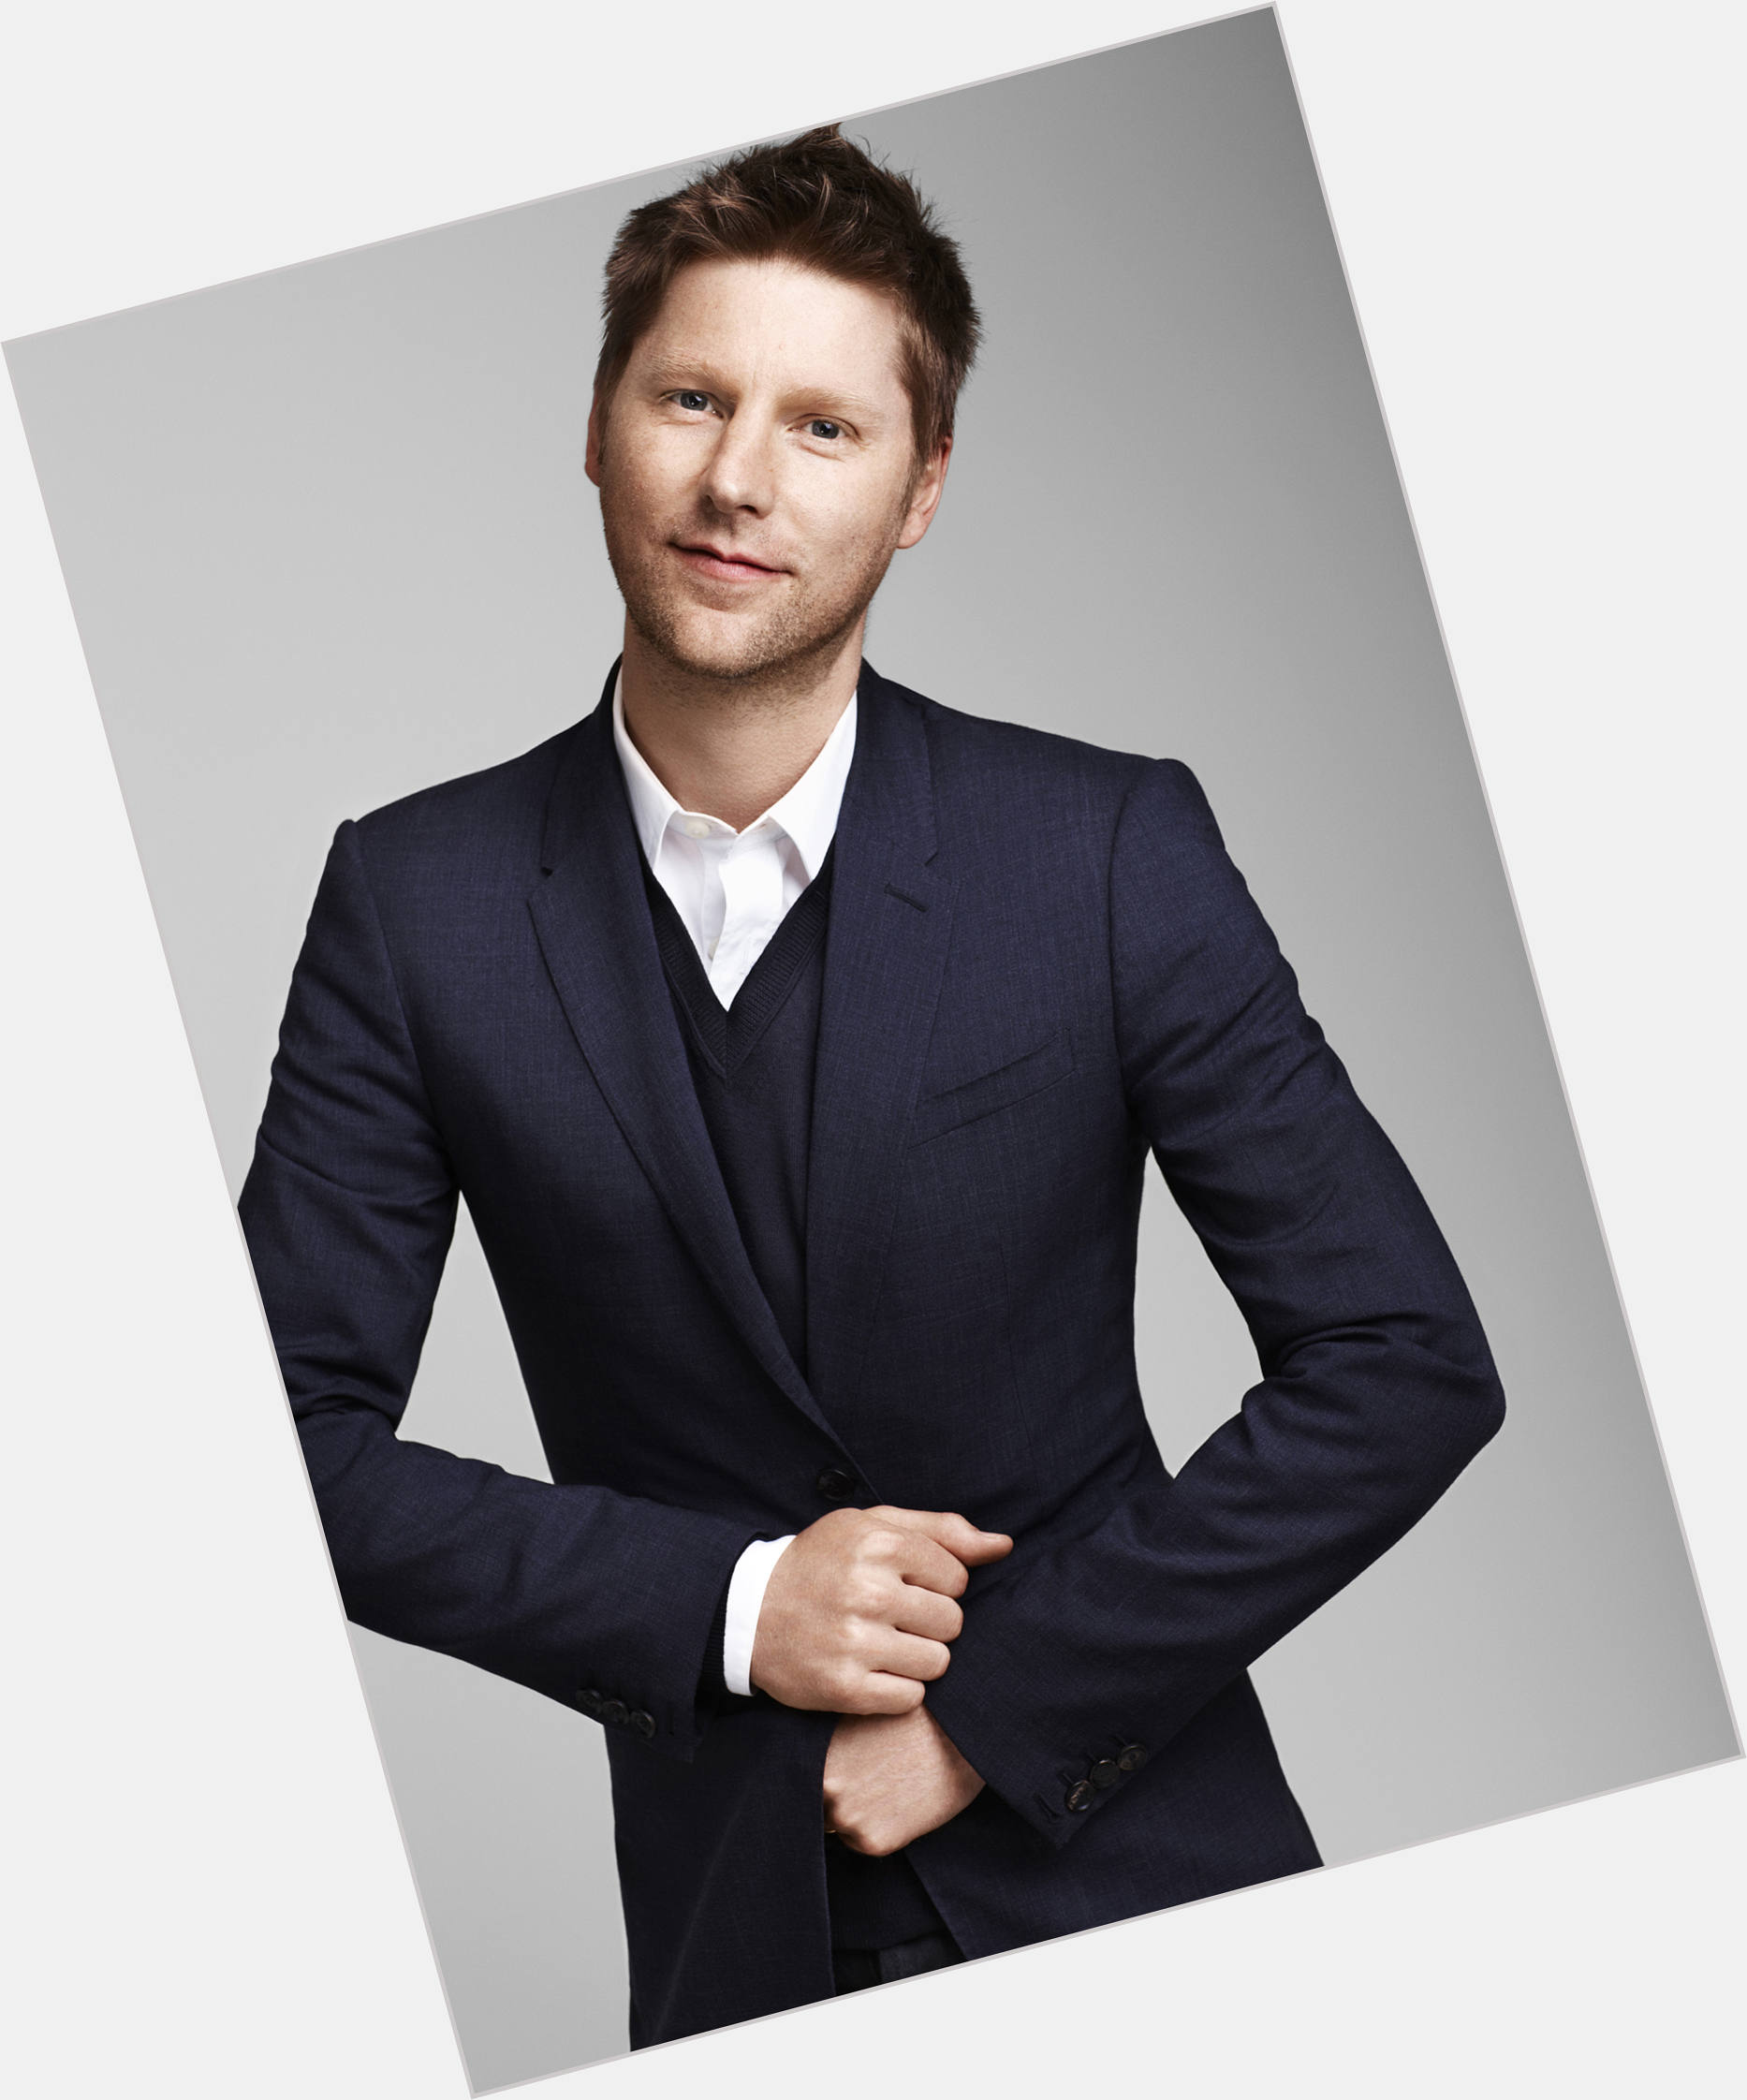 Http://fanpagepress.net/m/C/Christopher Bailey New Pic 1